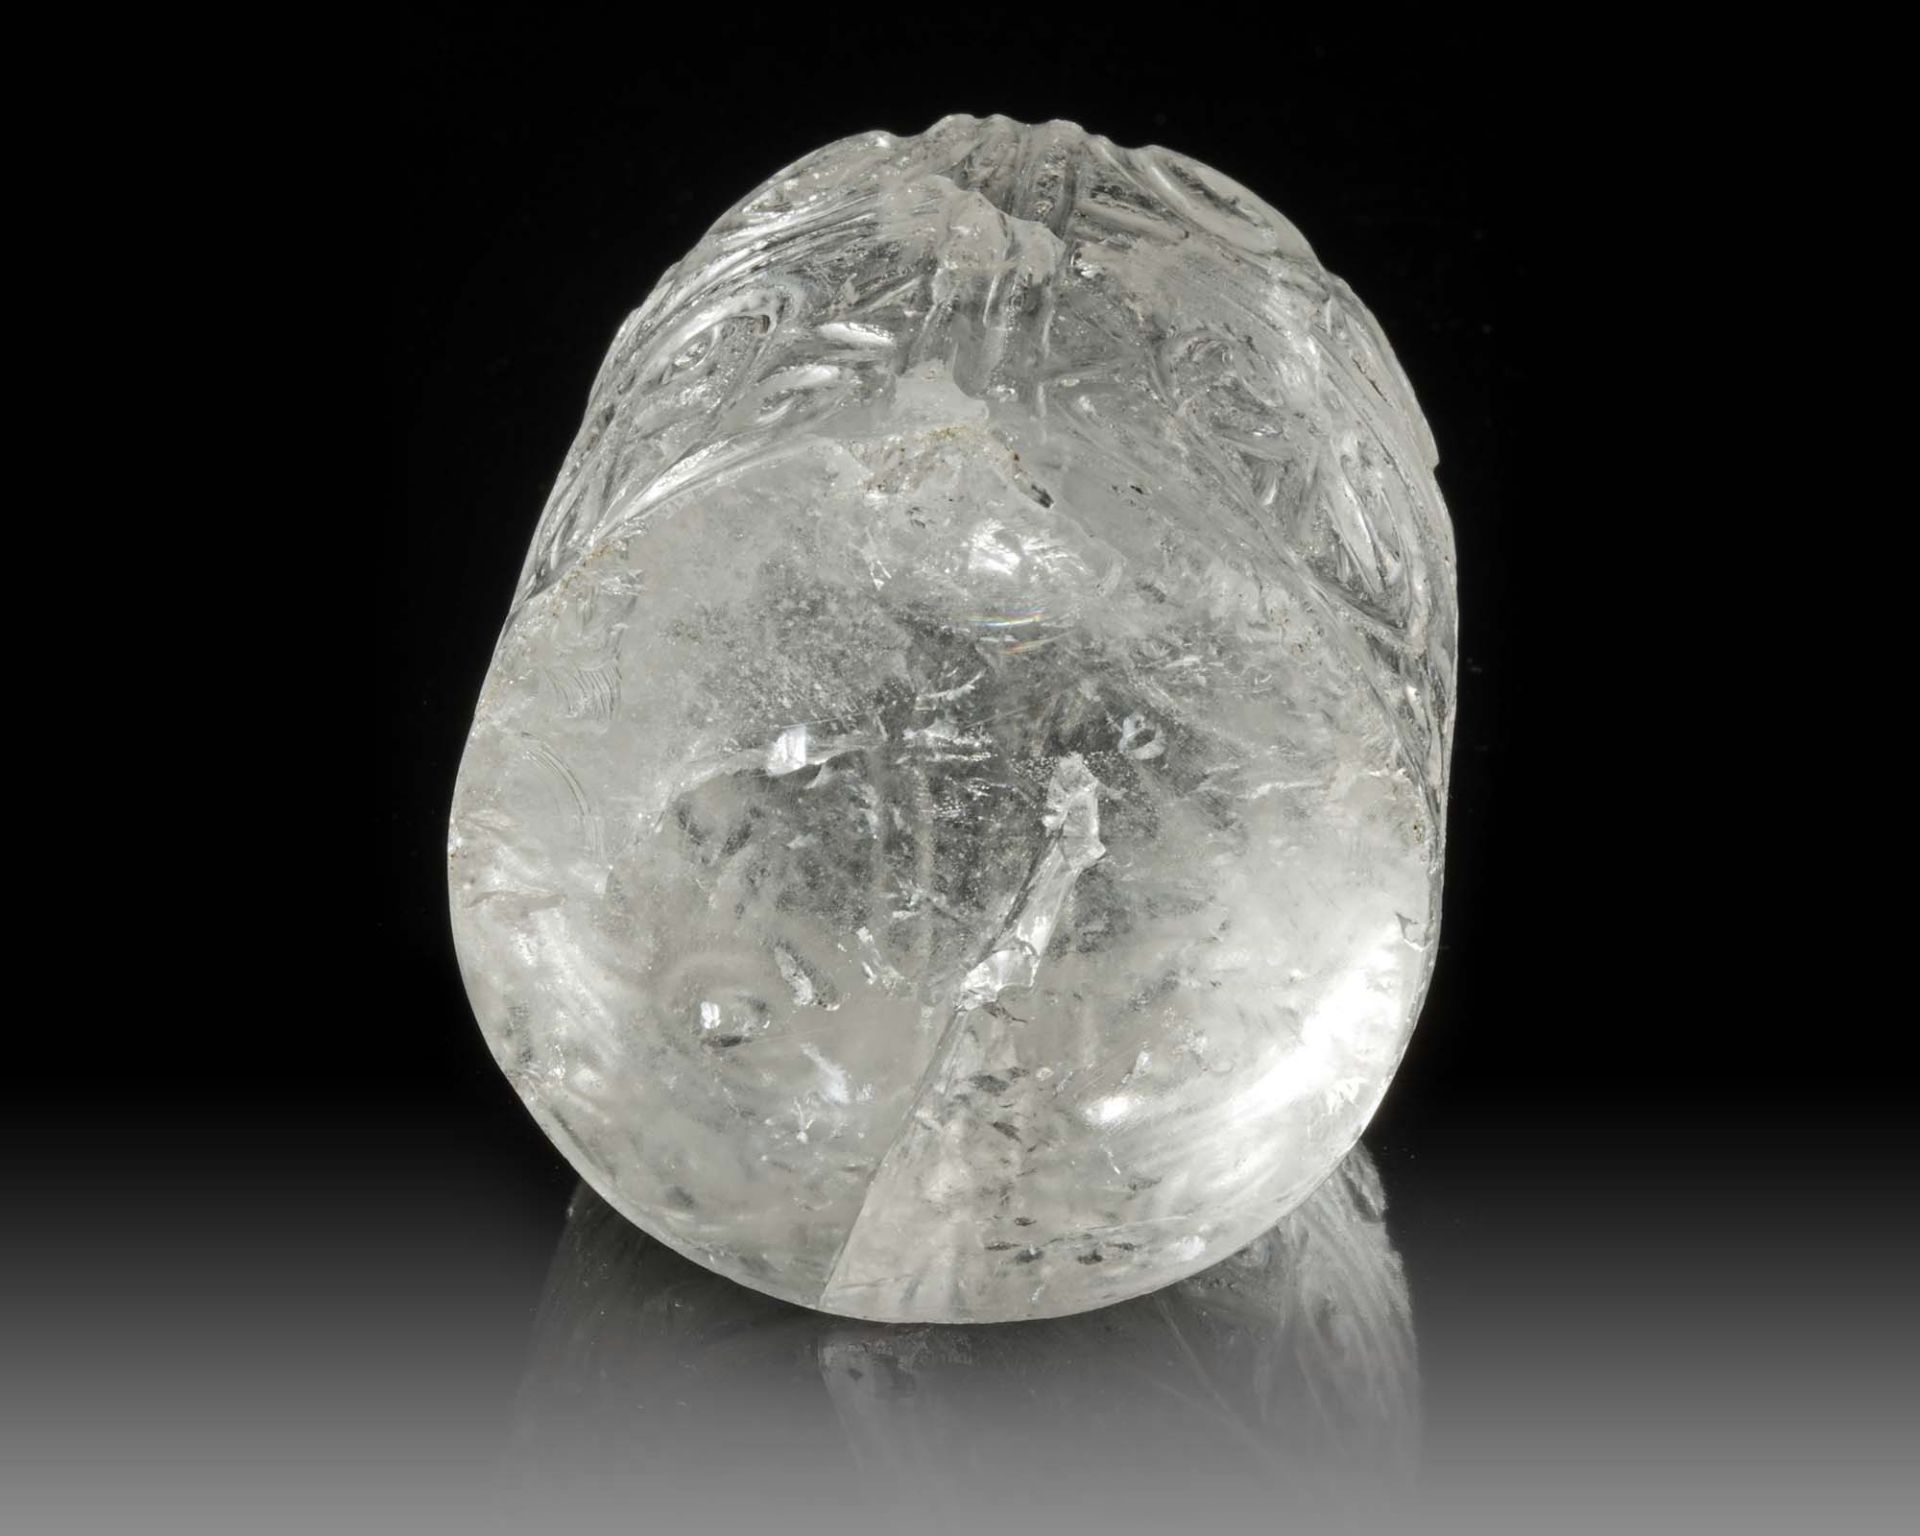 A FATIMID ROCK CRYSTAL CHESS PIECE, EGYPT, 11TH CENTURY - Image 7 of 8